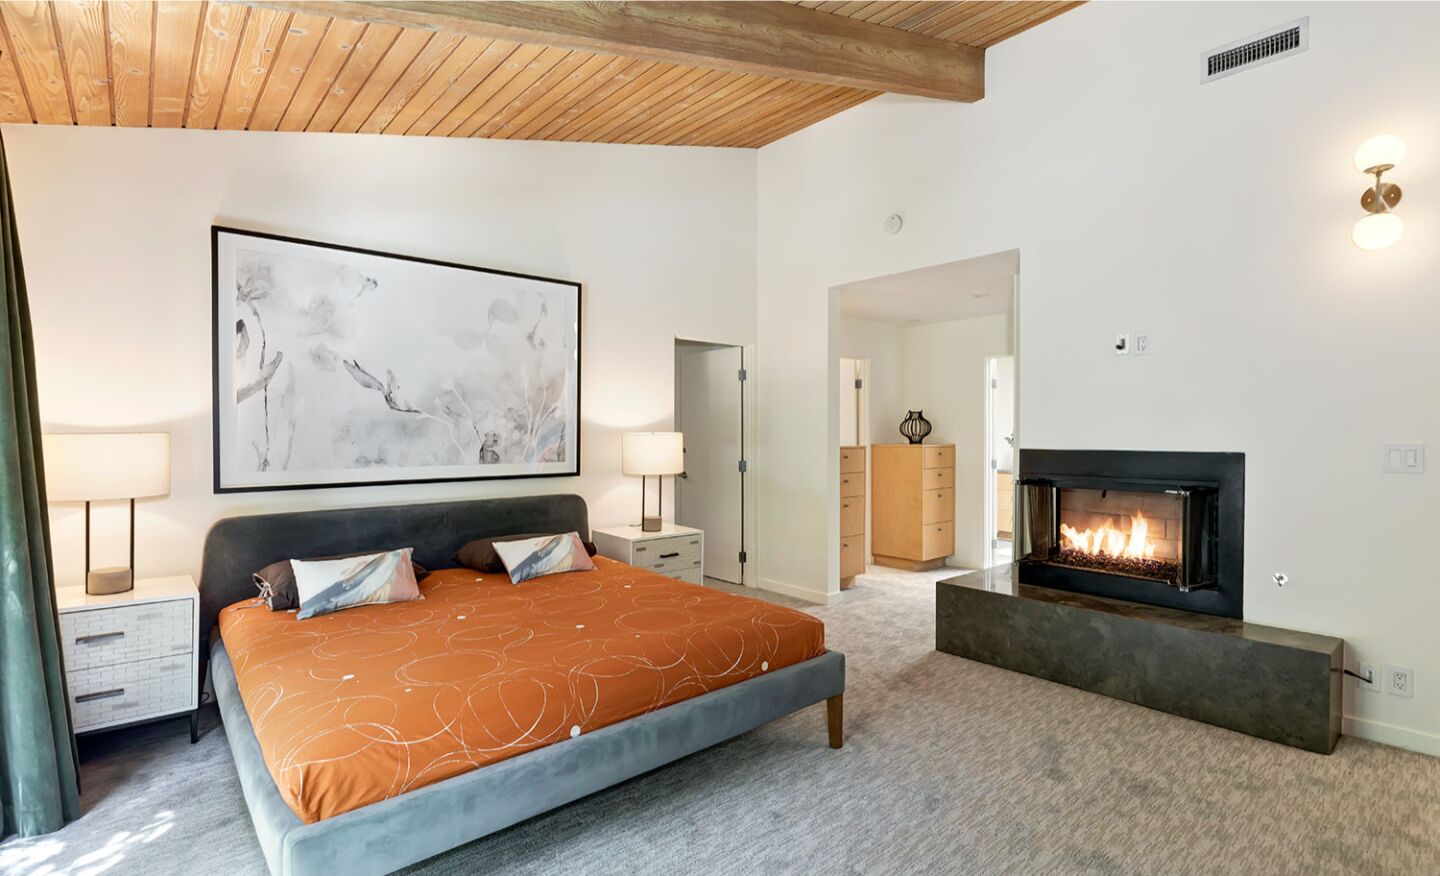 The master bedroom with a fireplace.